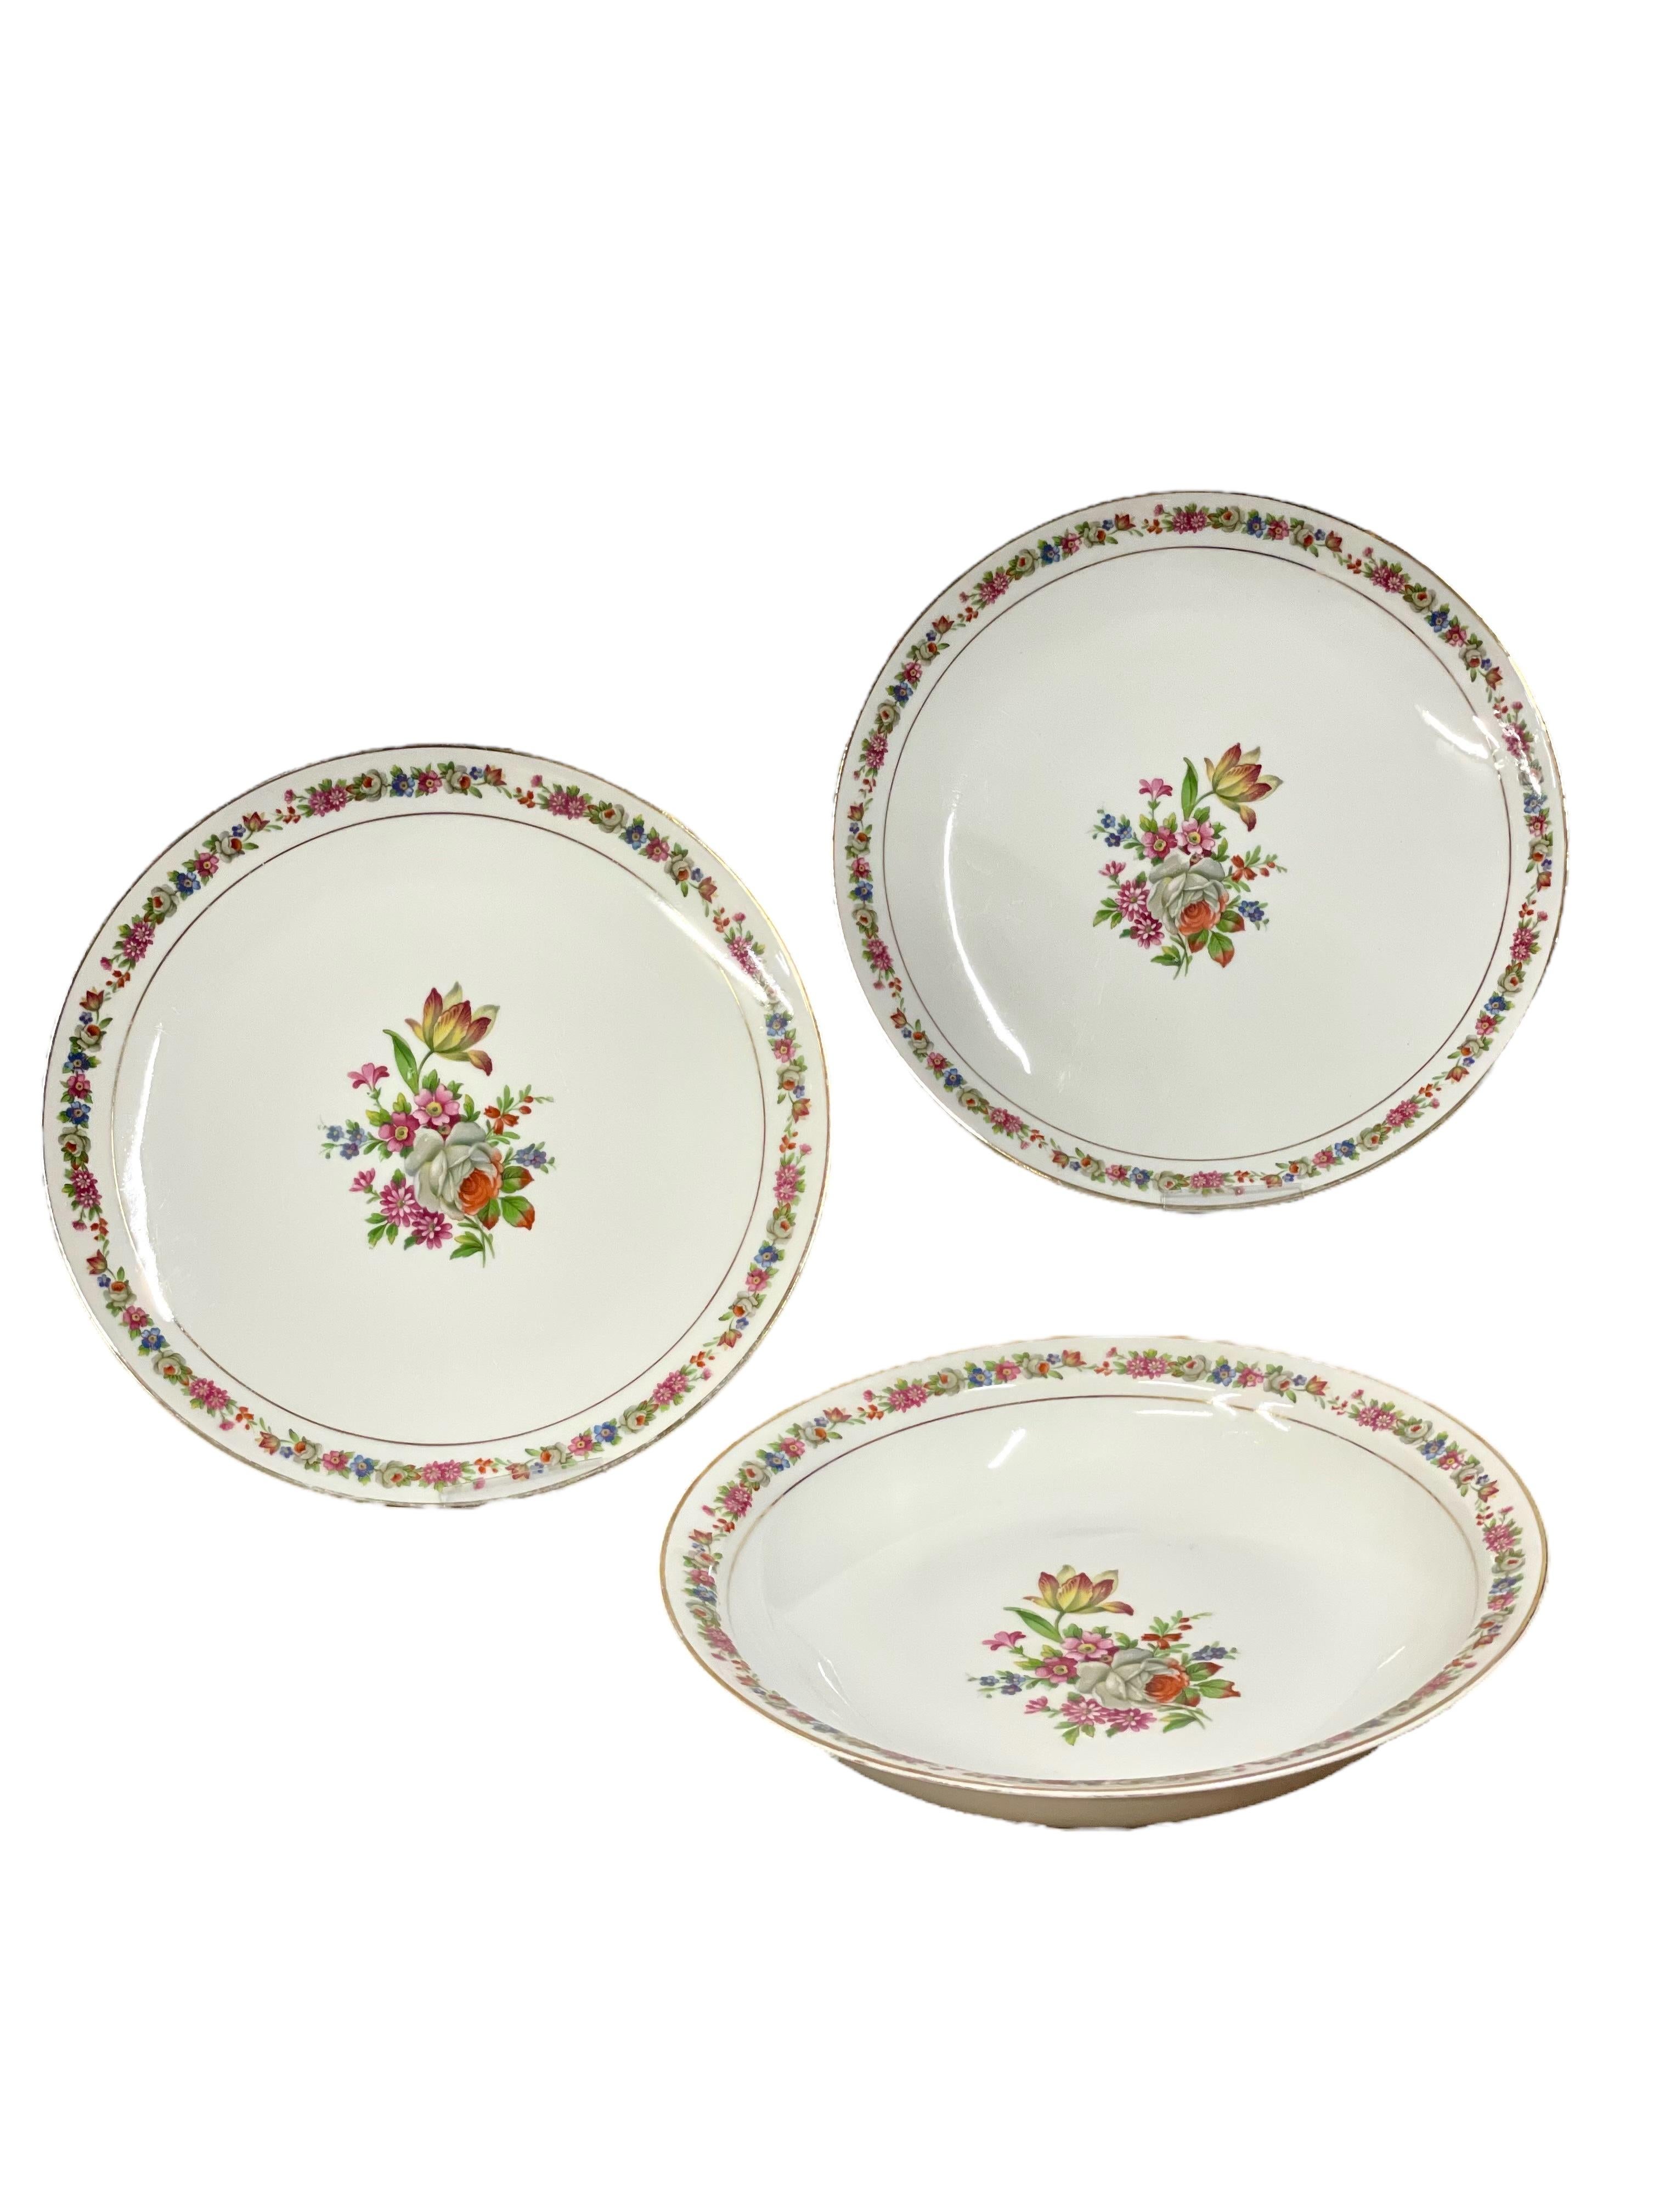 Dinner Service in Limoges Porcelain by Raynaud & Cie 2